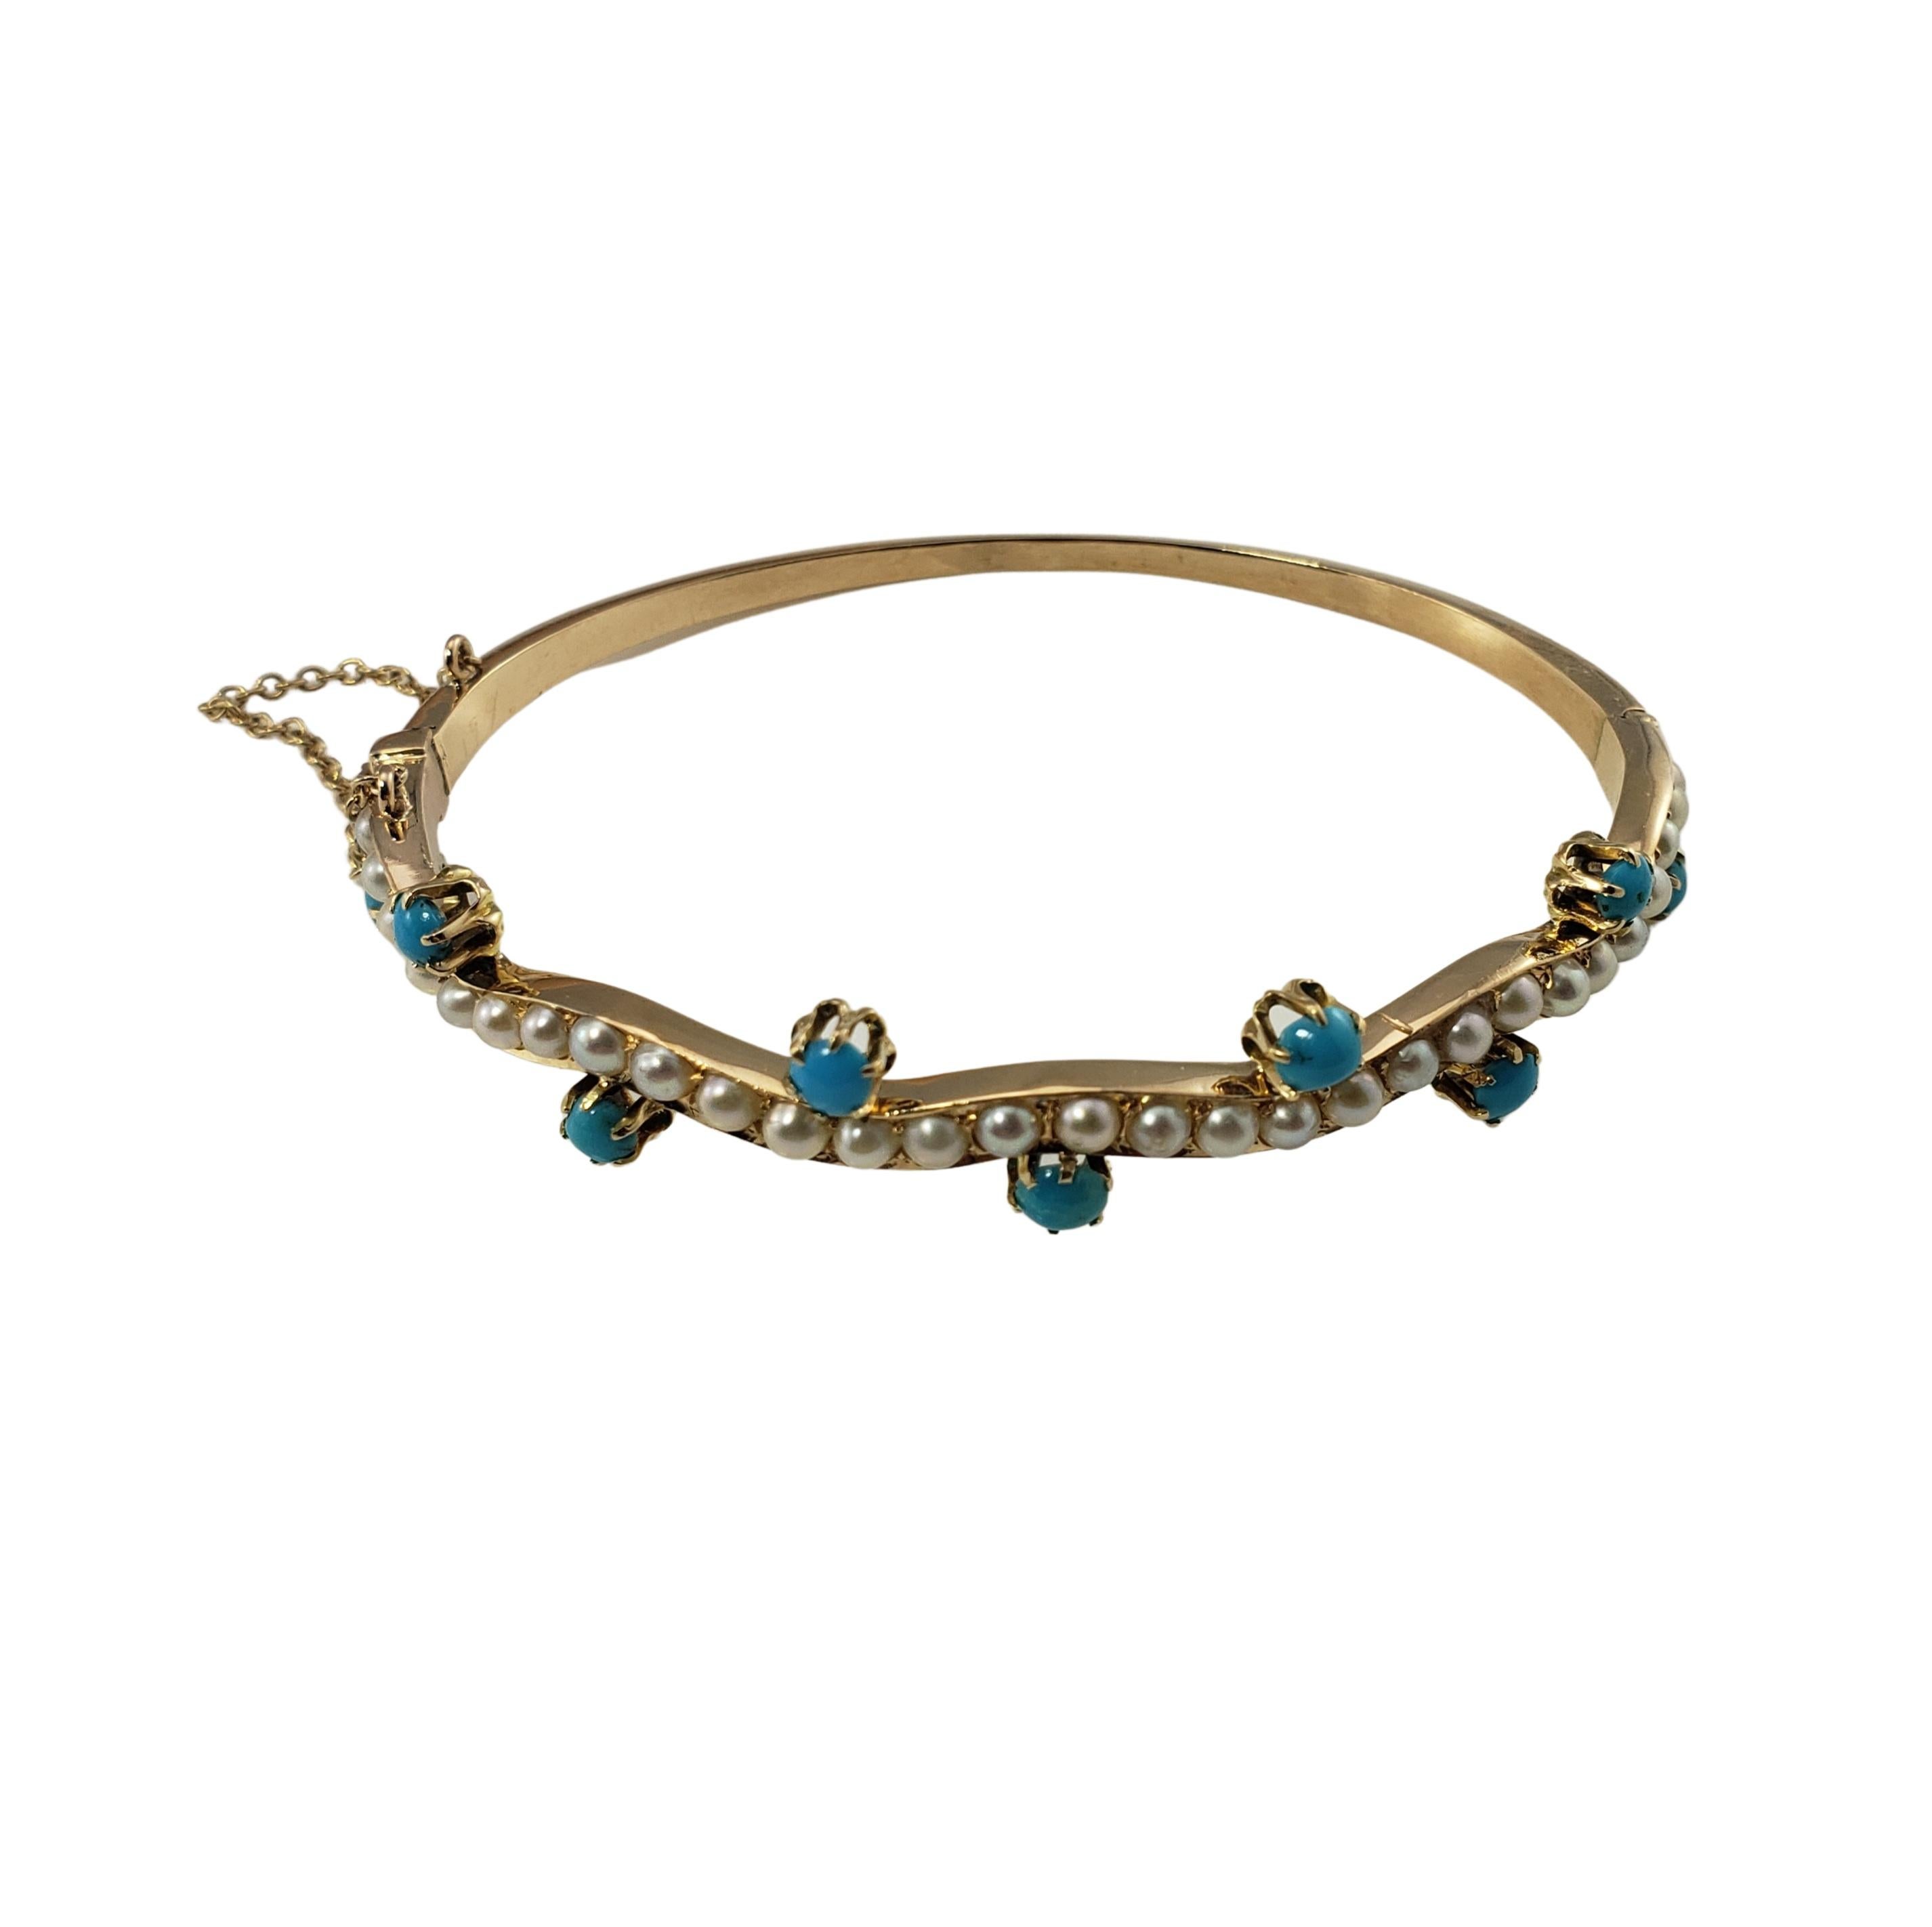 14 Karat Yellow Gold Turquoise and Seed Pearl Bangle Bracelet-

This lovely hinged bangle bracelet features nine round turquoise stones and 29 white seed pearls set in beautifully detailed 14K yellow gold.  Width:  4 mm.

Size: 6.75 inches

Weight: 